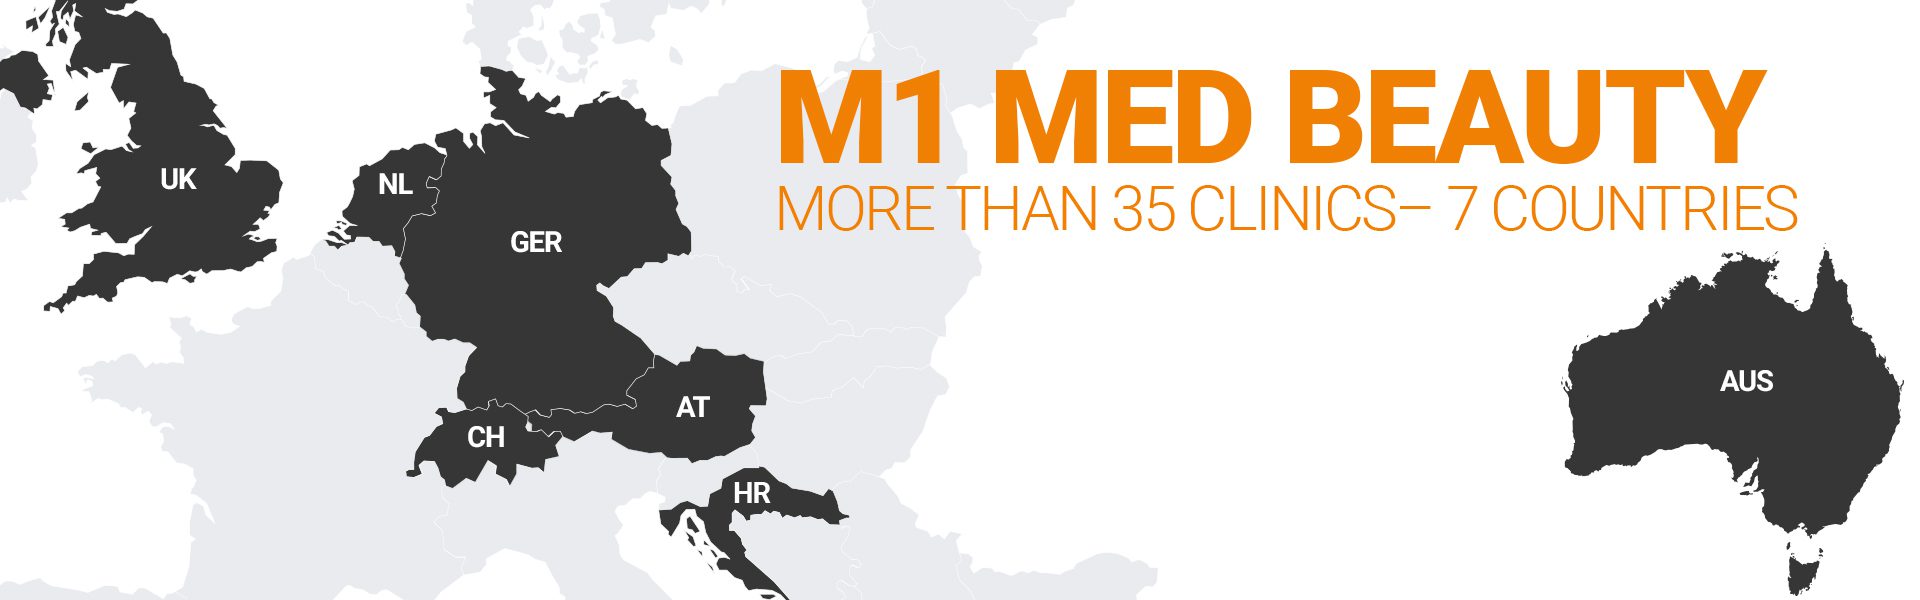 M1 Med Beauty is the leader in world-class aesthetic medicine and plastic surgery. You can find M1 in 7 countries worlwide.